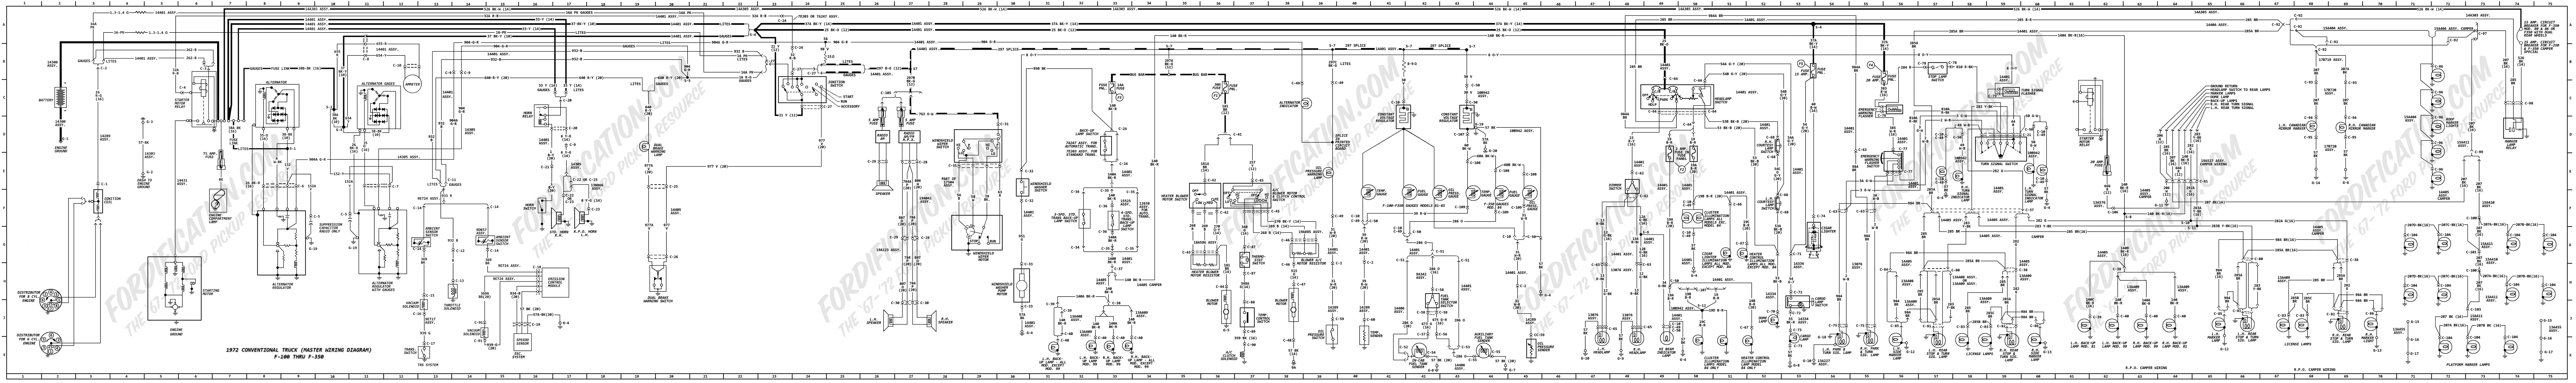 1966 Ford F250 Wiring Diagram from fordification.com